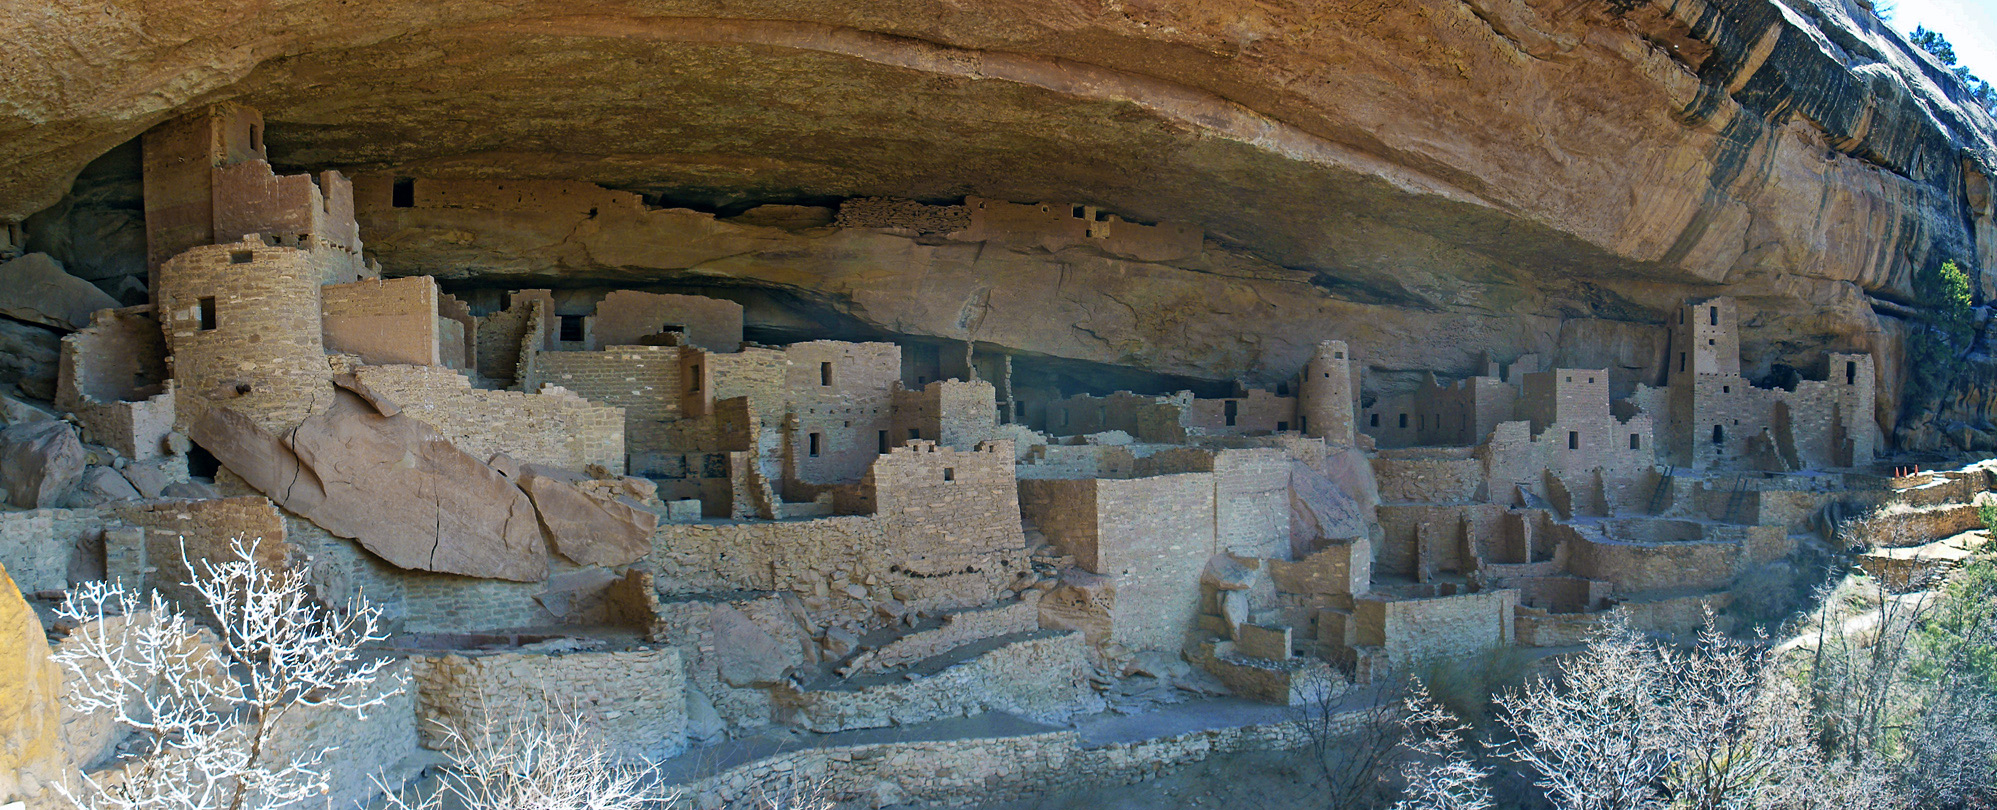 Wide view of Cliff Palace